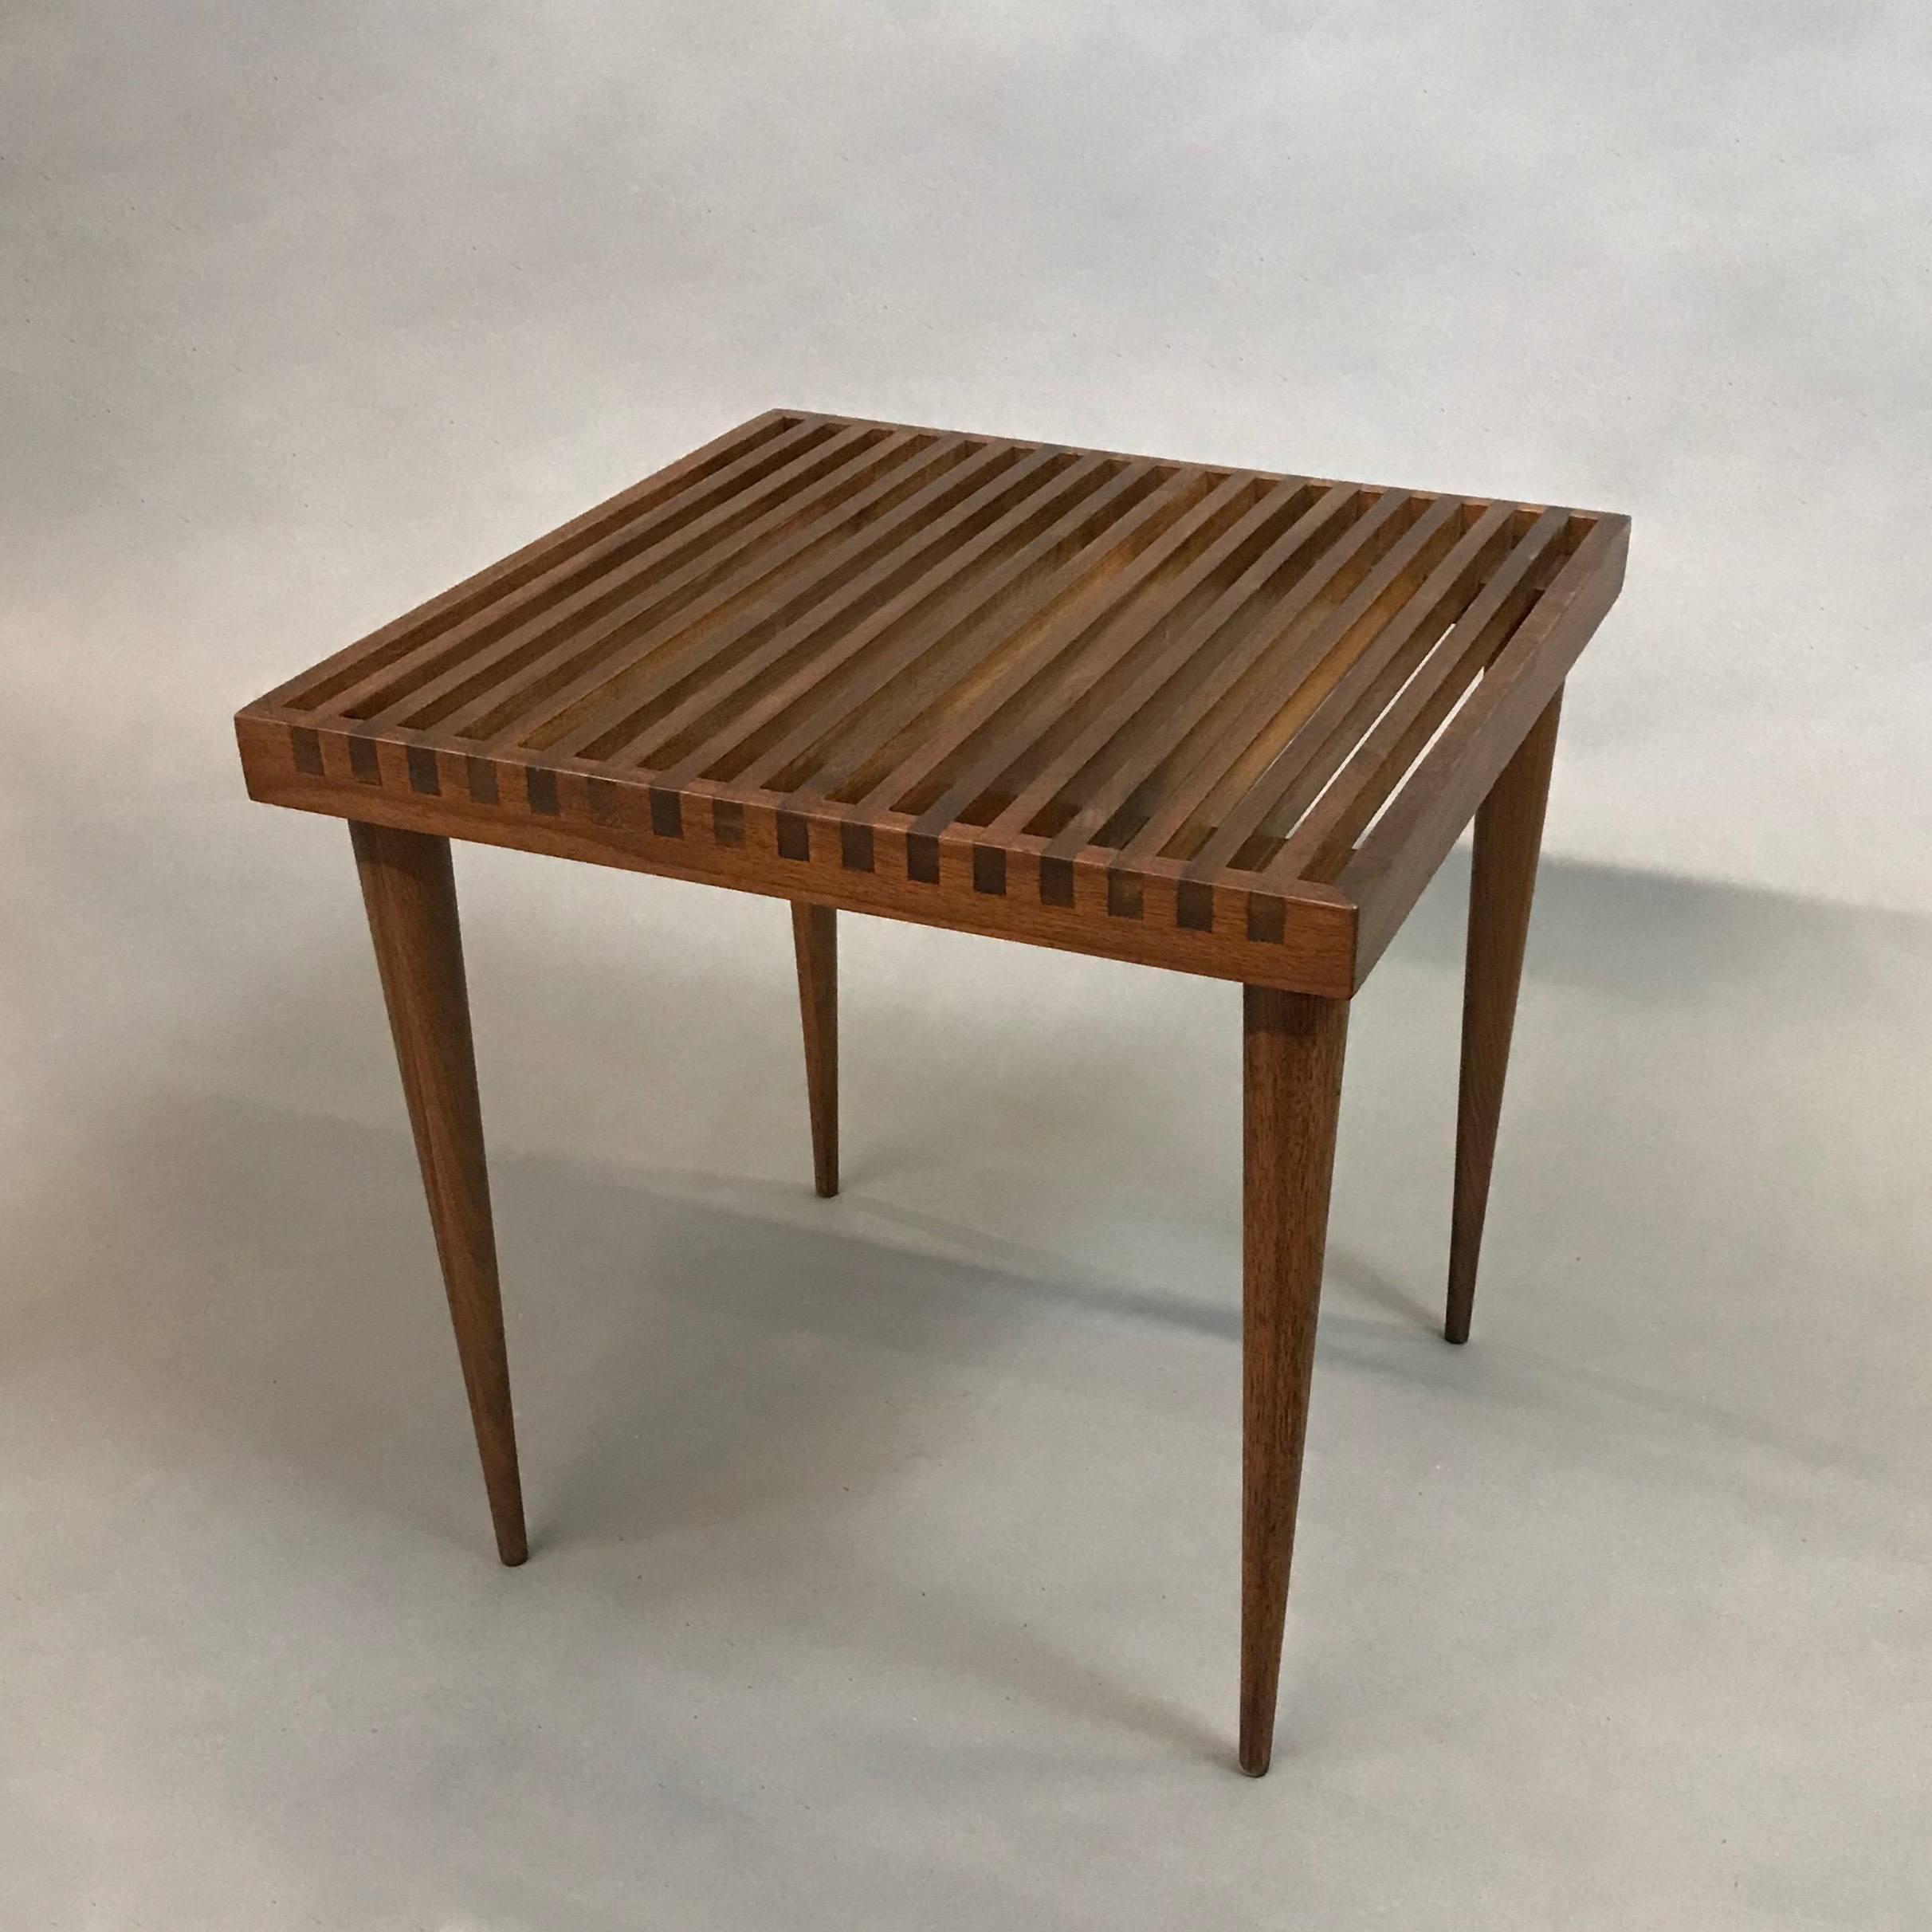 Mid-Century Modern, slatted walnut side table with elegant dovetail details and tapered legs designed by Mel Smilow.